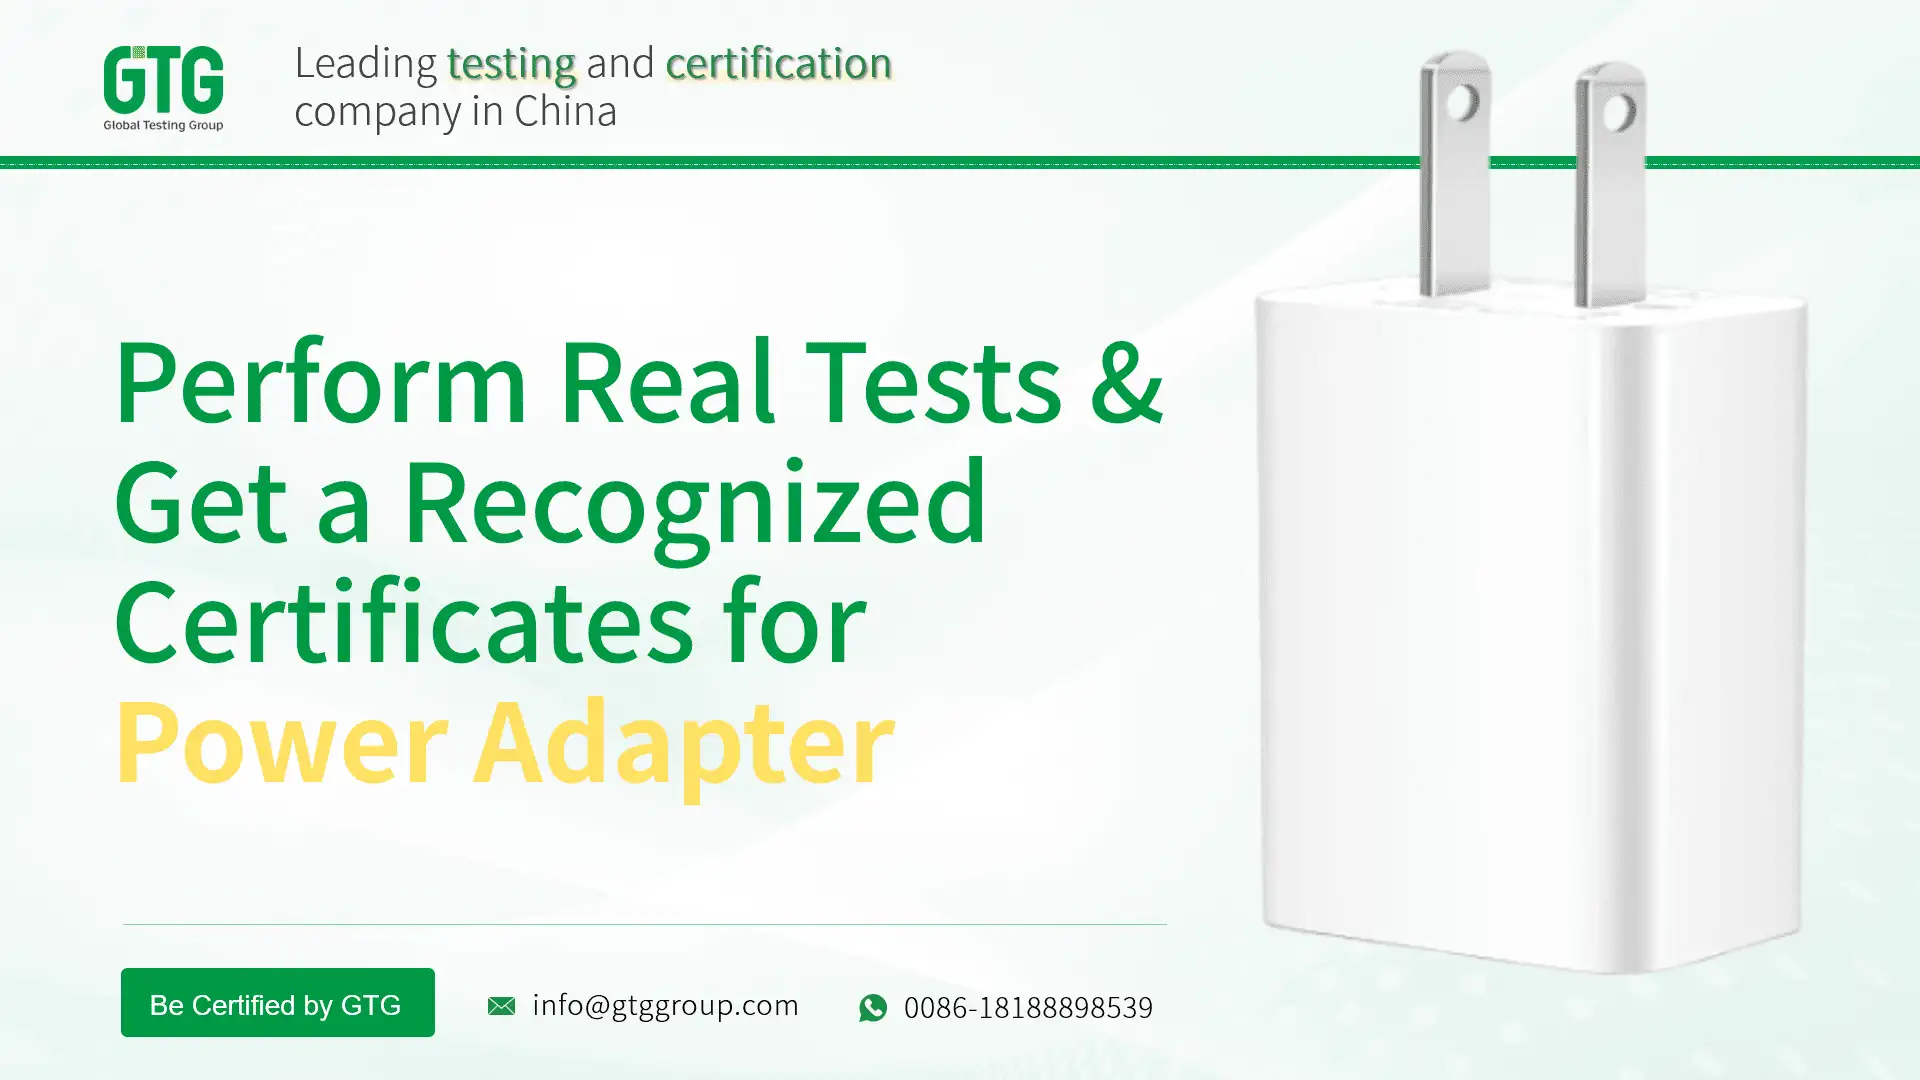 Get Test Report and Certifications for Power Adapter from GTG Group